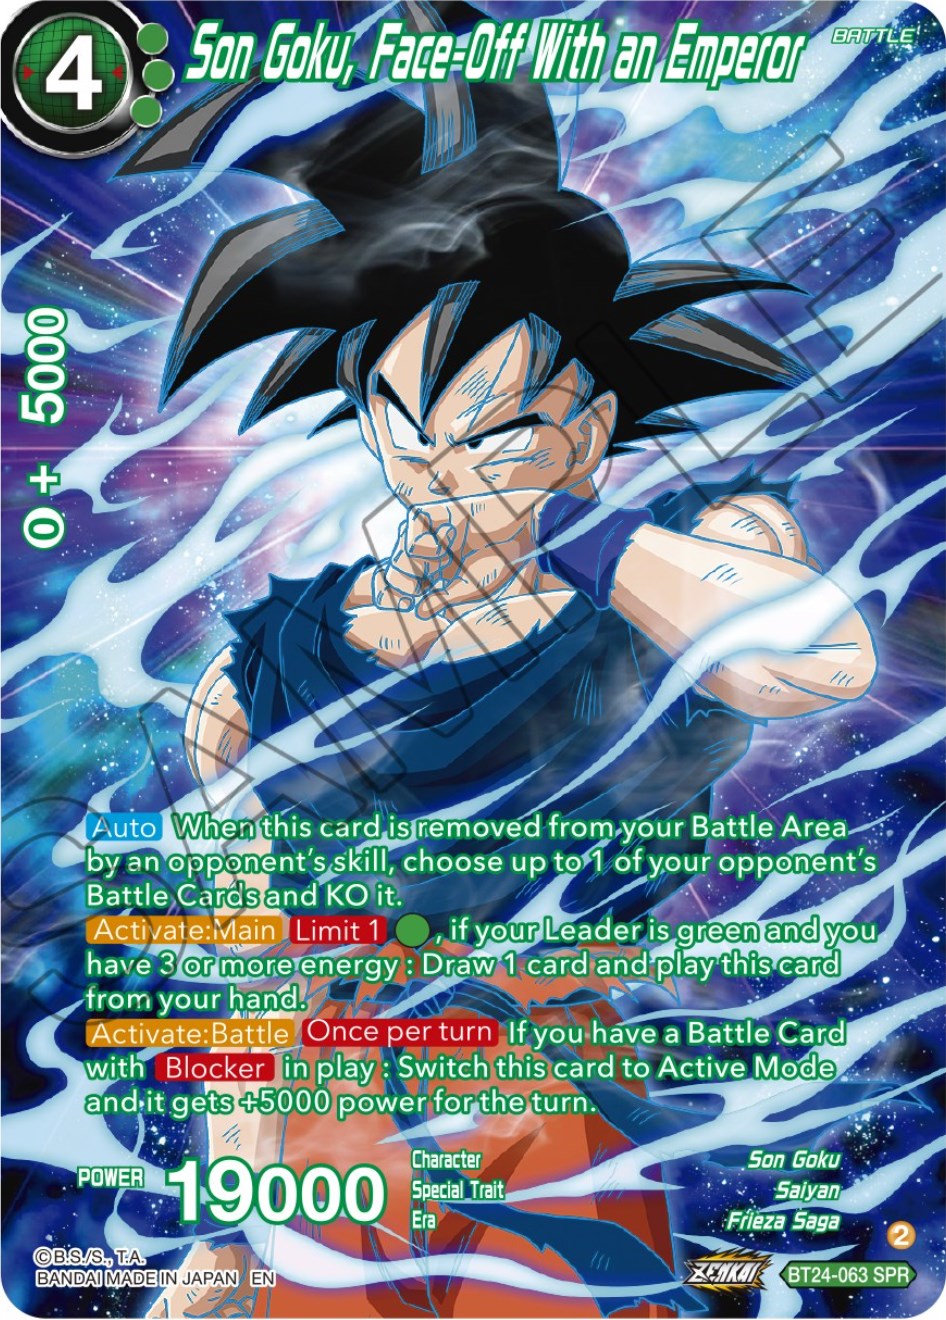 Son Goku, Face-Off With an Emperor (SPR) (BT24-063) [Beyond Generations] | Pegasus Games WI